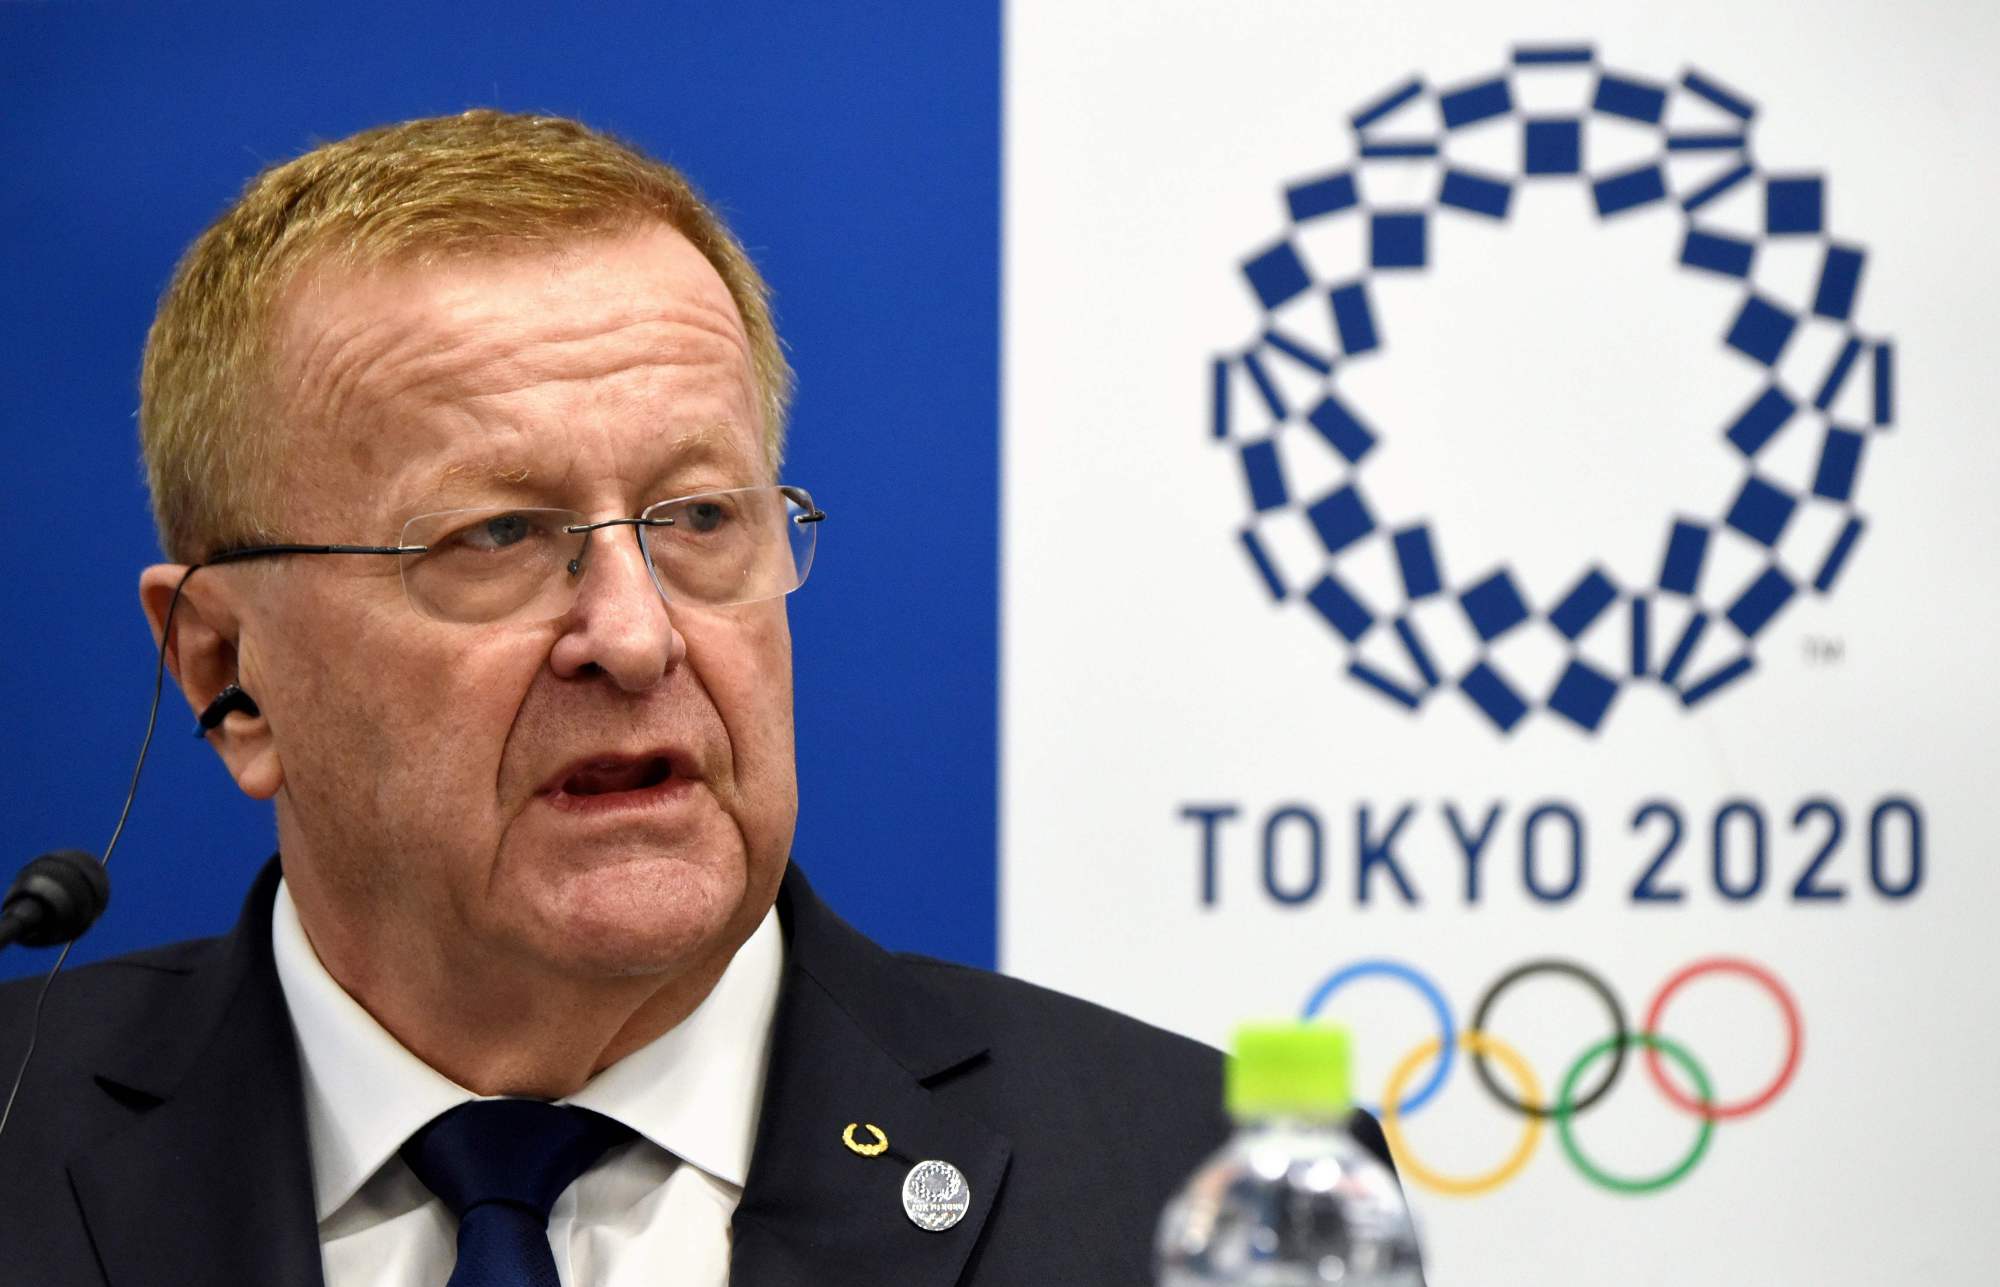 John Coates, vice president of the International Olympic Committee and chairman of the IOC Coordination Commission for the Tokyo 2020 Olympic Games, answers questions at a news conference Thursday in Tokyo after a two-day meeting with the Tokyo organizing committee to discuss progress on preparations. | AFP-JIJI